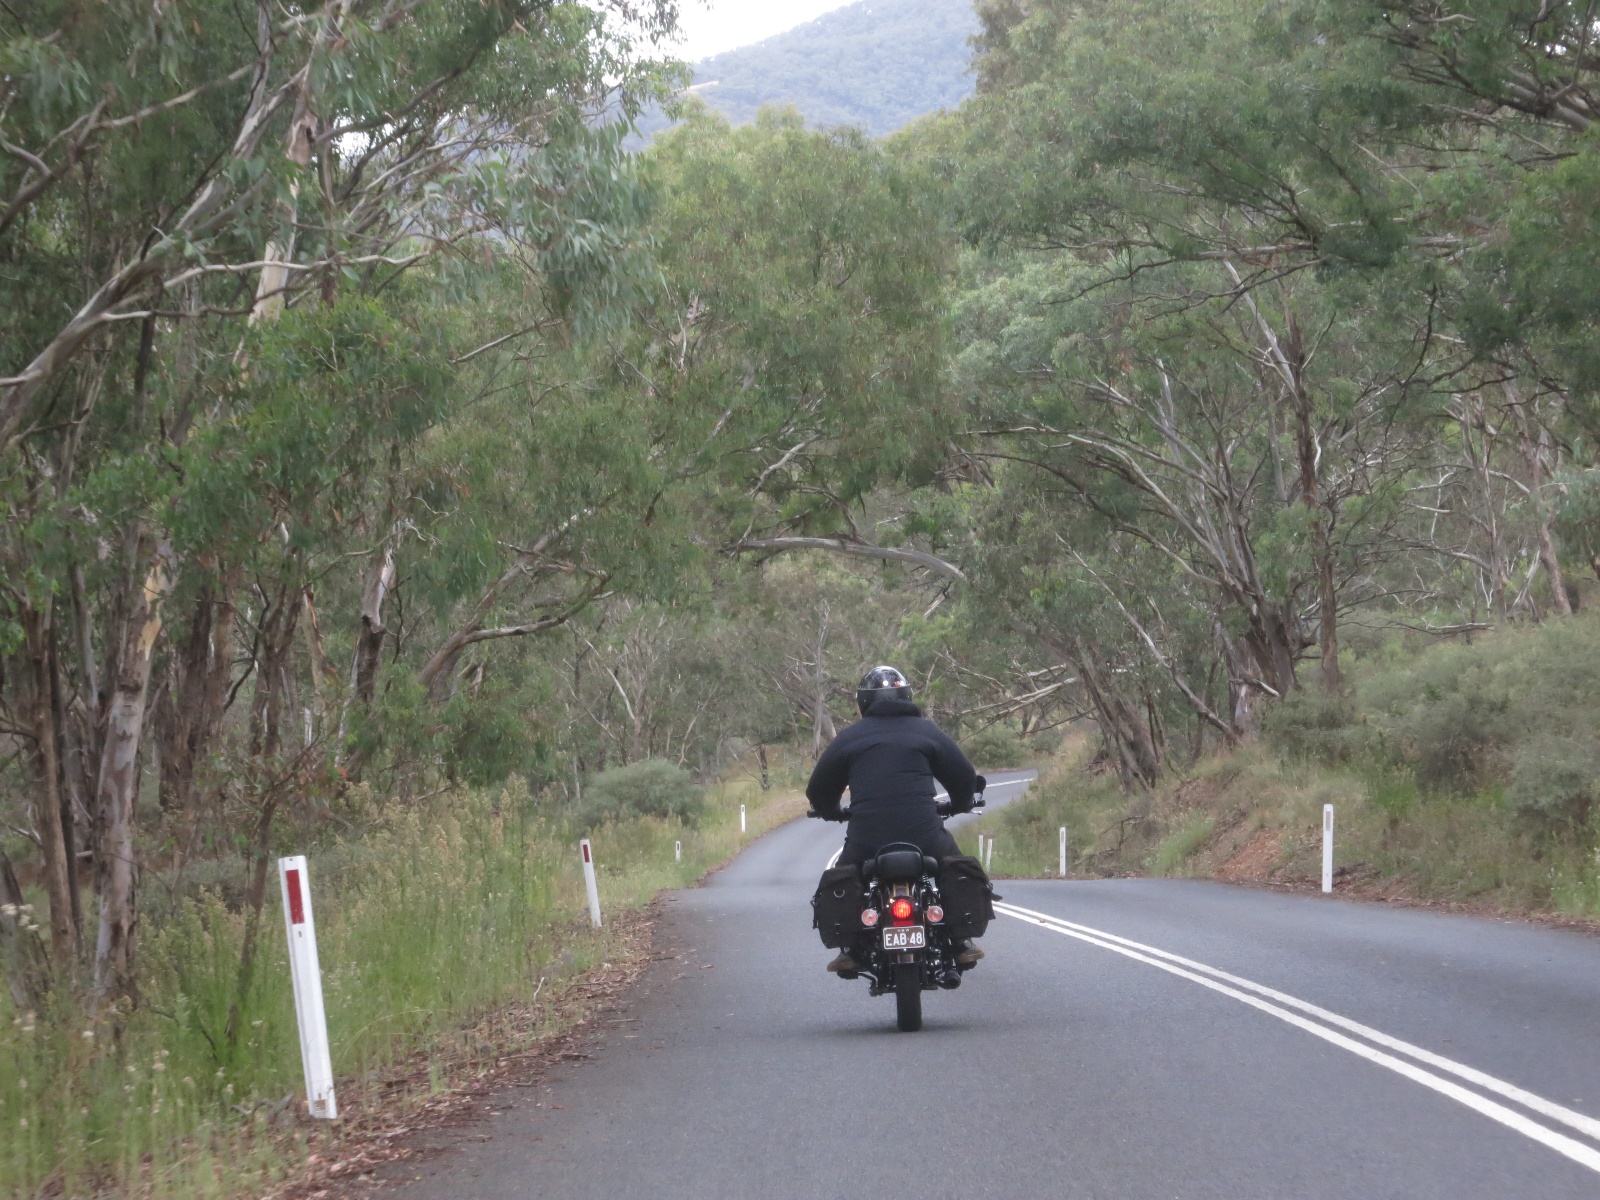 A person riding a motorcycle down a road

Description automatically generated with medium confidence